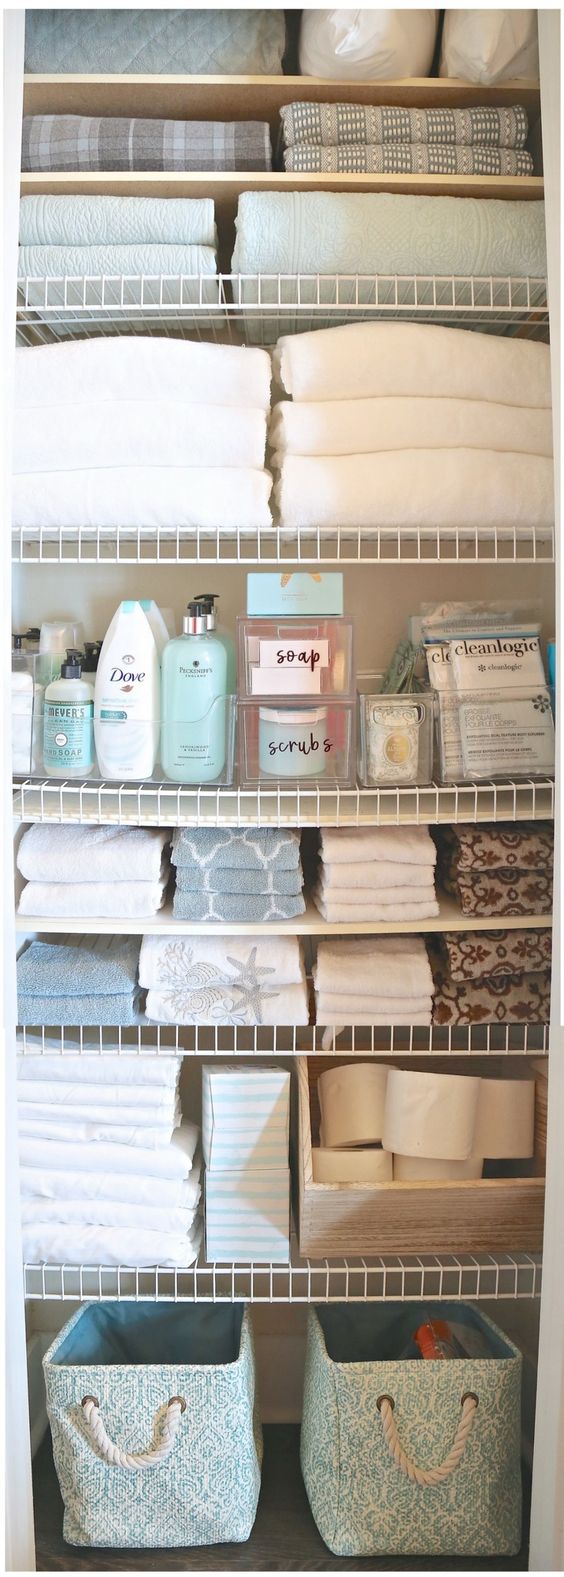 Use Shoe Storage Shelves to Organize Your Bathroom Cabinet. 